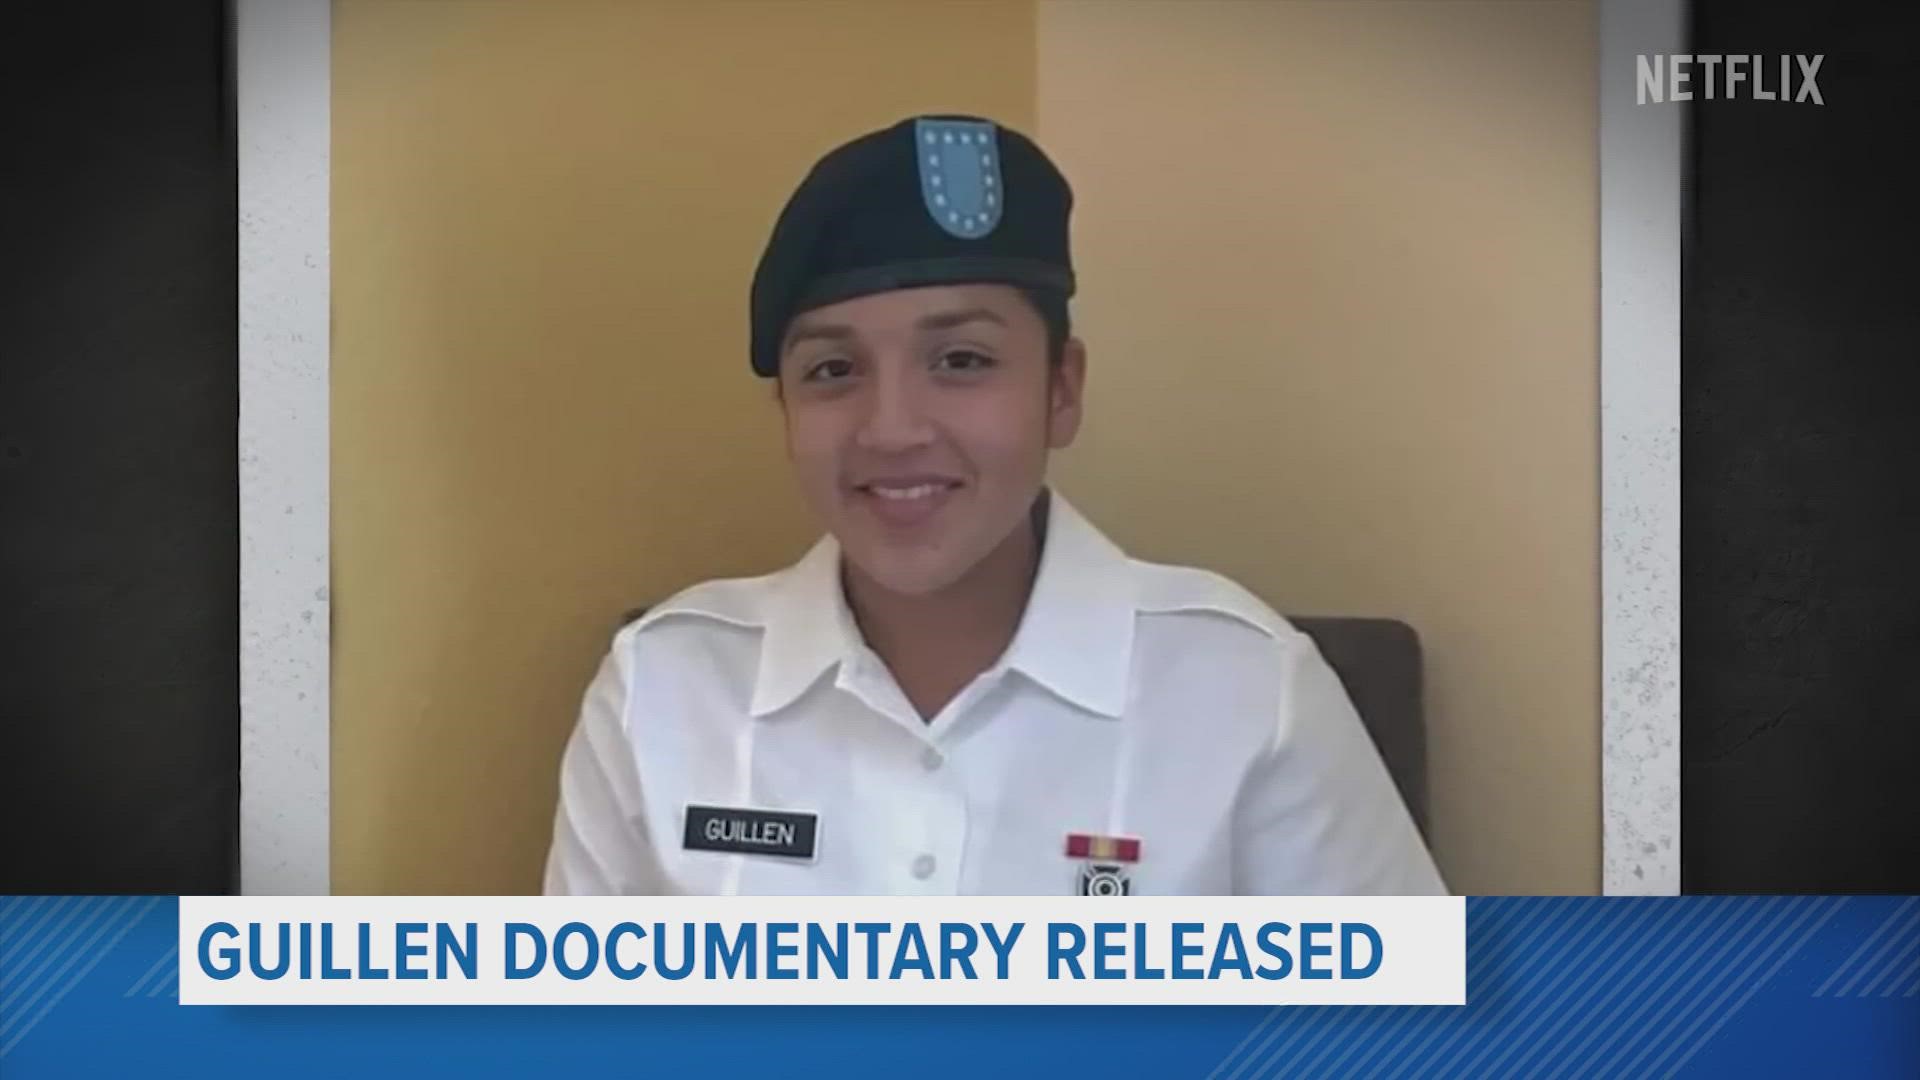 The documentary chronicles the Houston native and Army recruit who was murdered at Fort Hood in 2020.